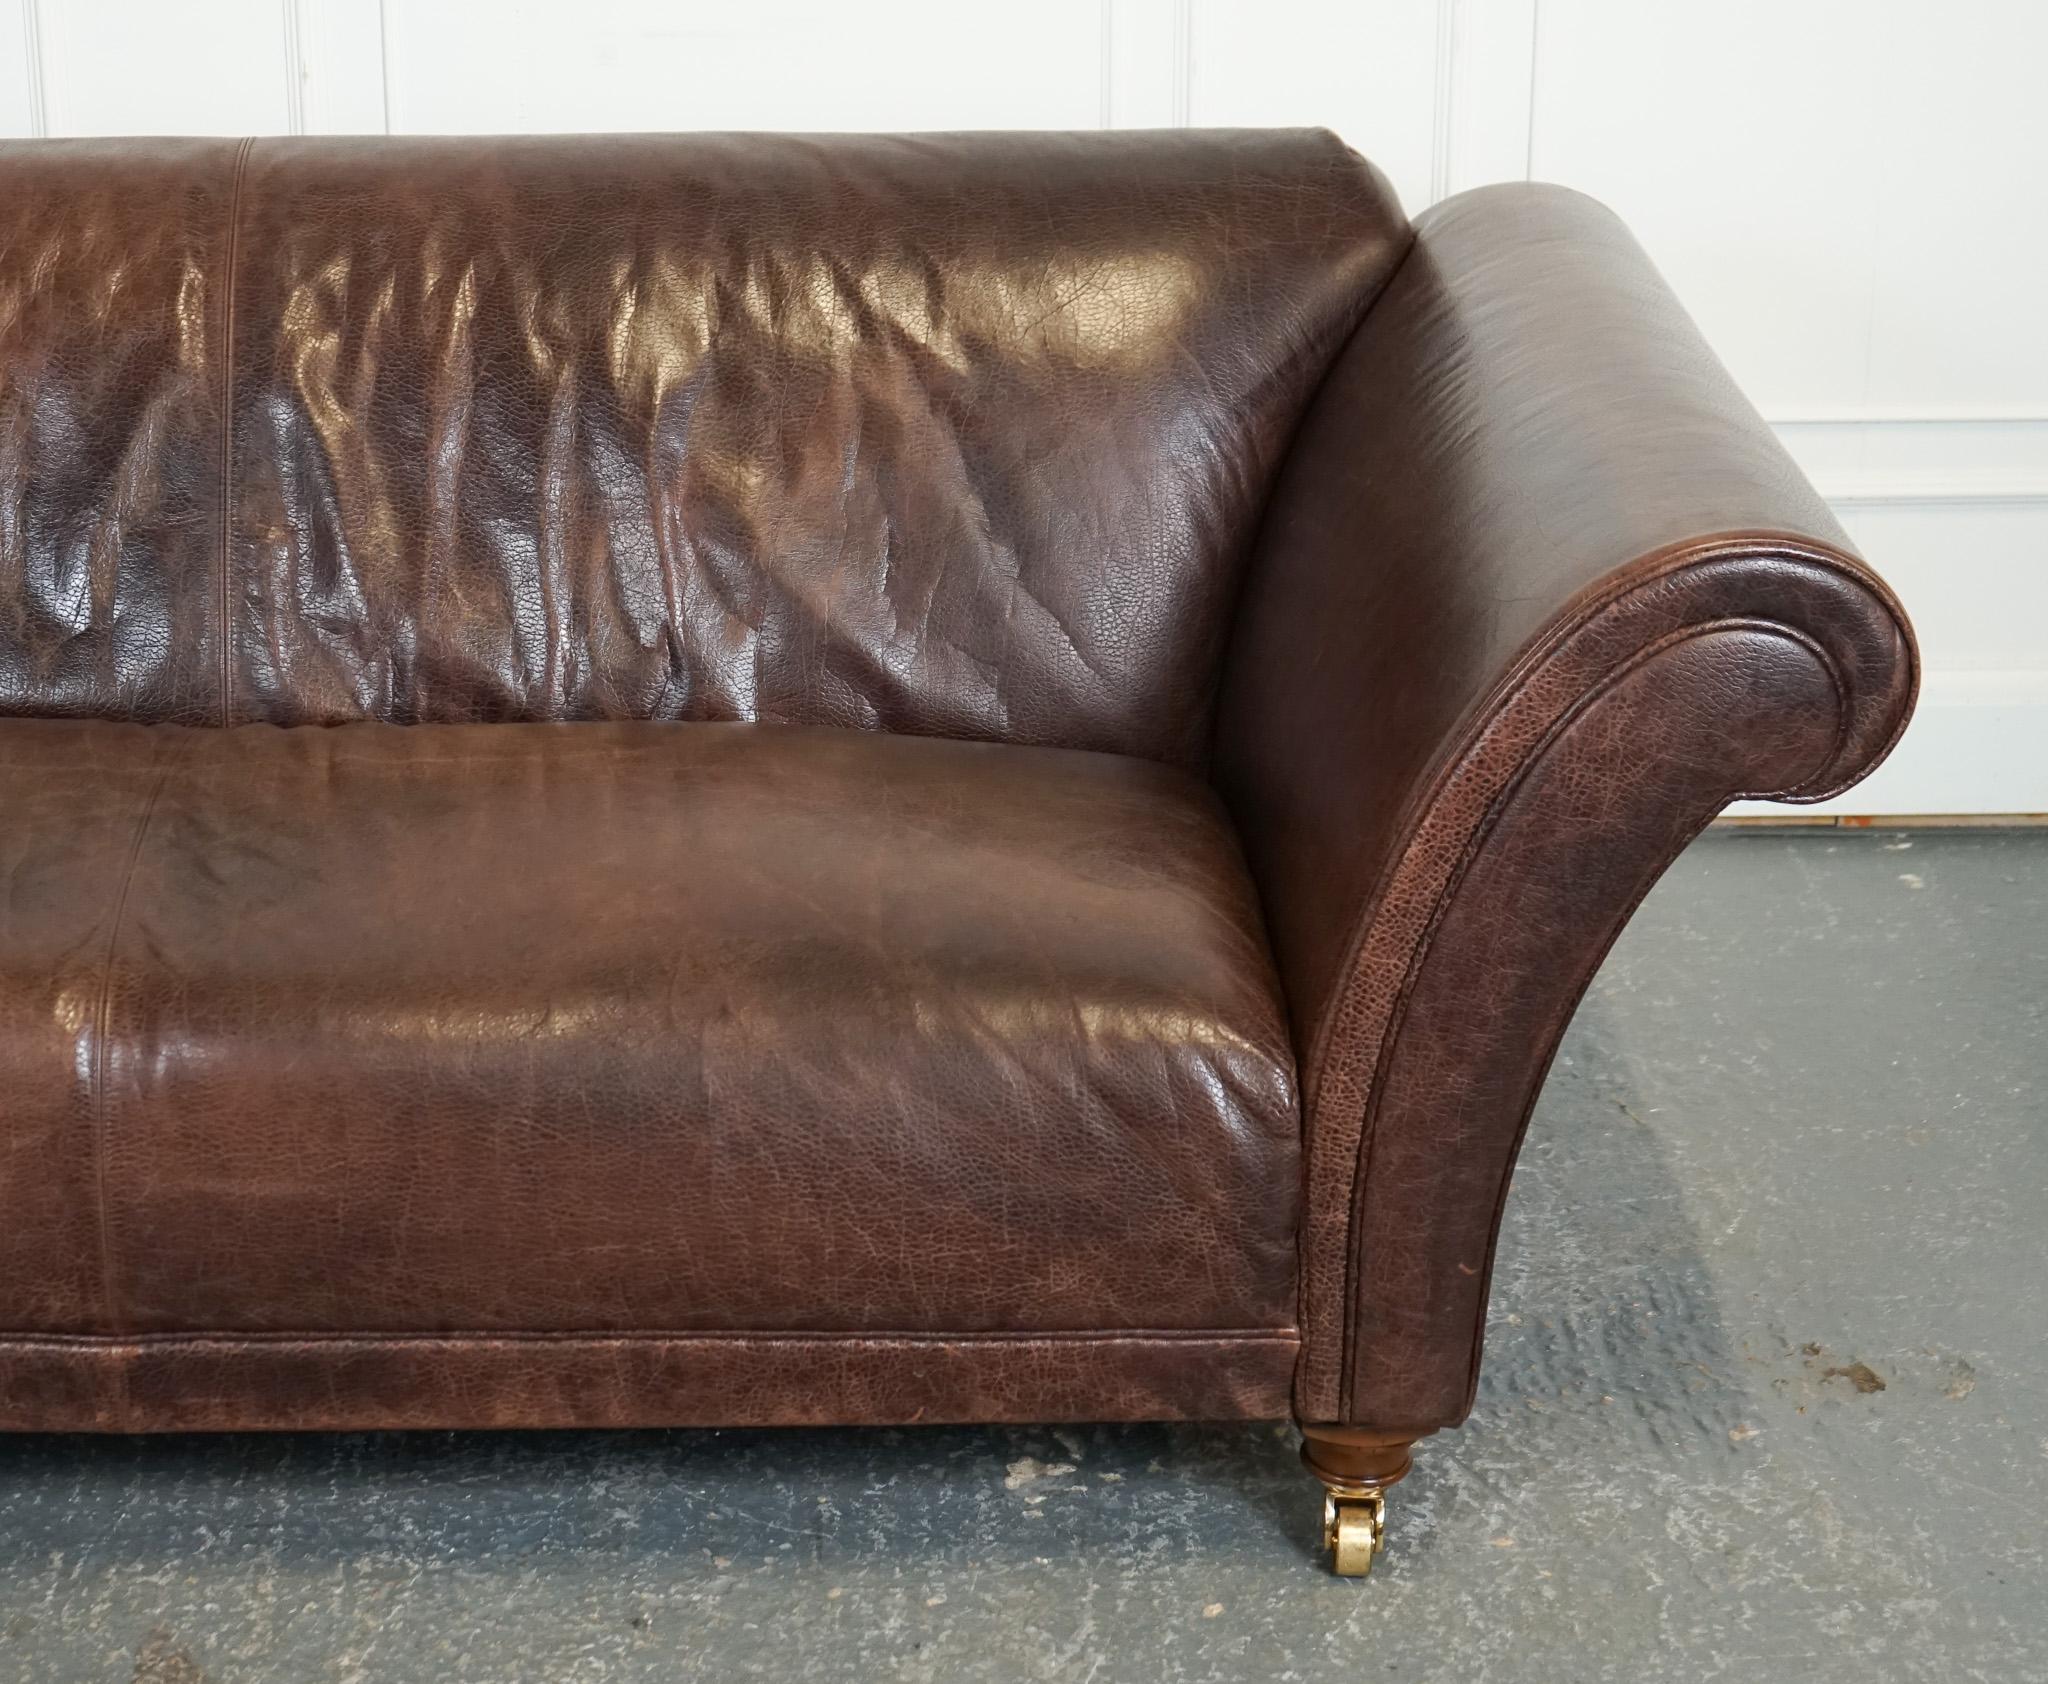 STUNNING FISHPOOLS HERiTAGE BROWN LEATHER 2 TO 3 SEATER SOFA In Good Condition For Sale In Pulborough, GB